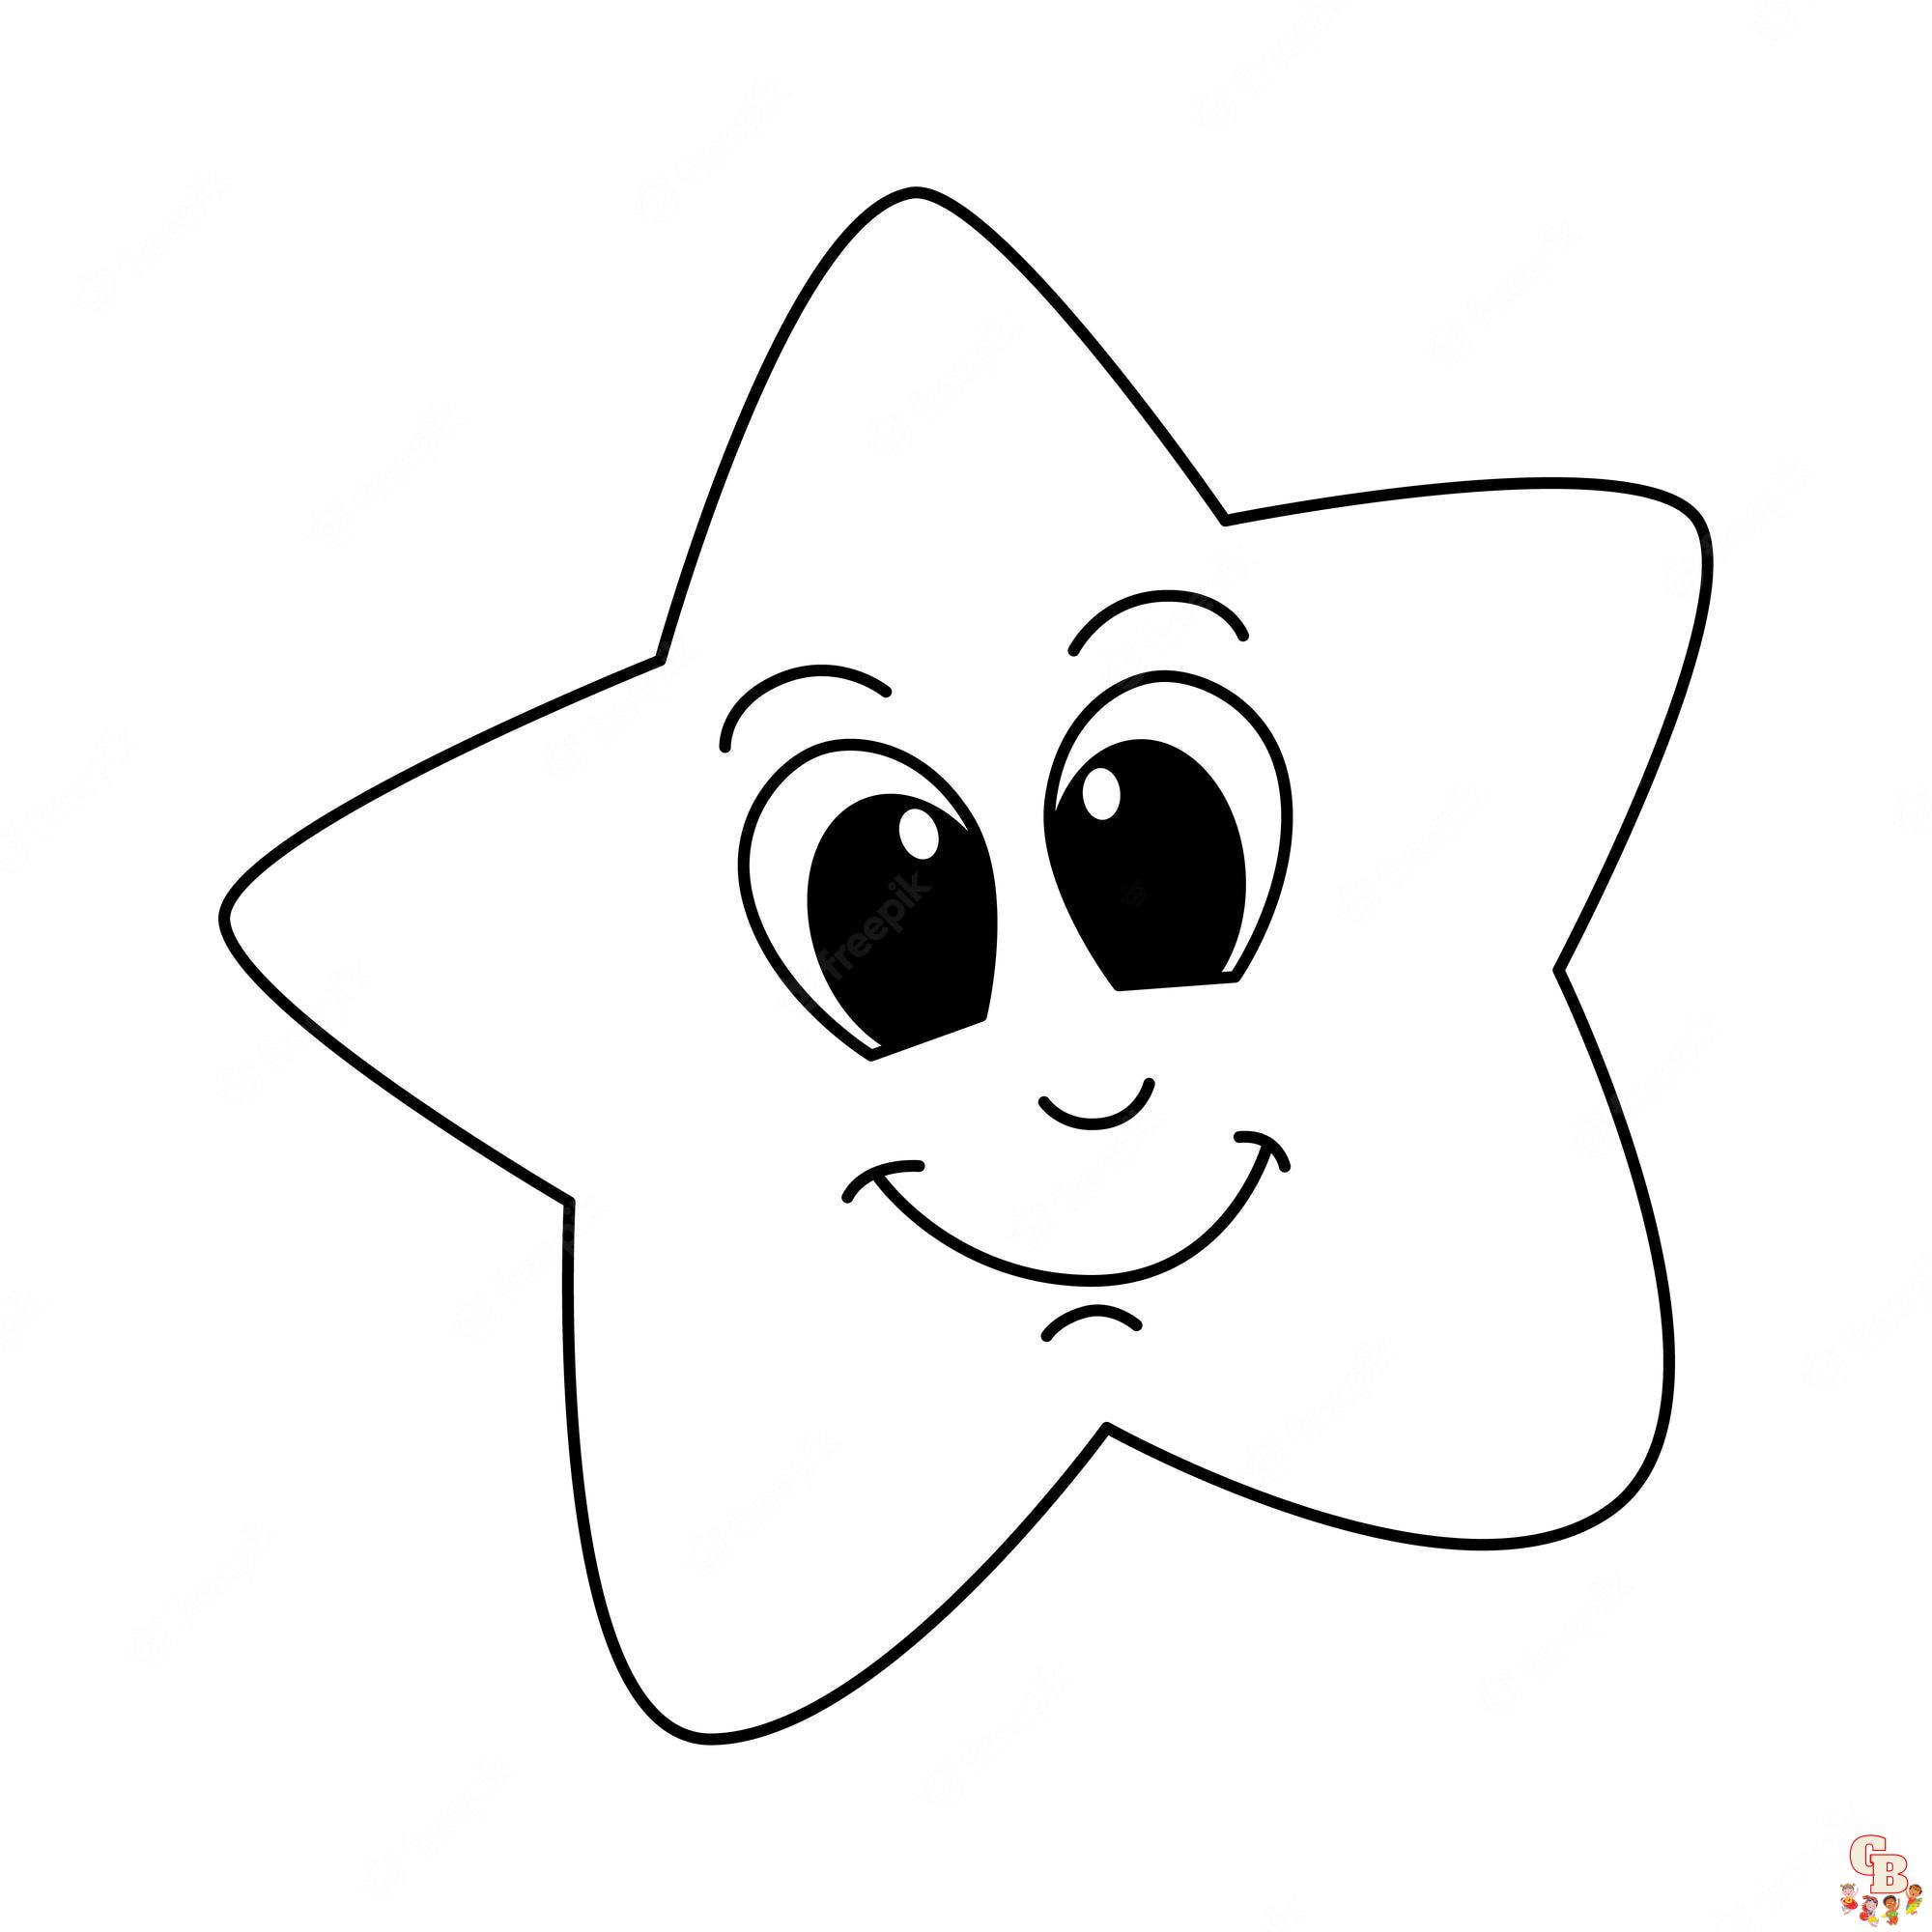 Cute Stars coloring pages easy